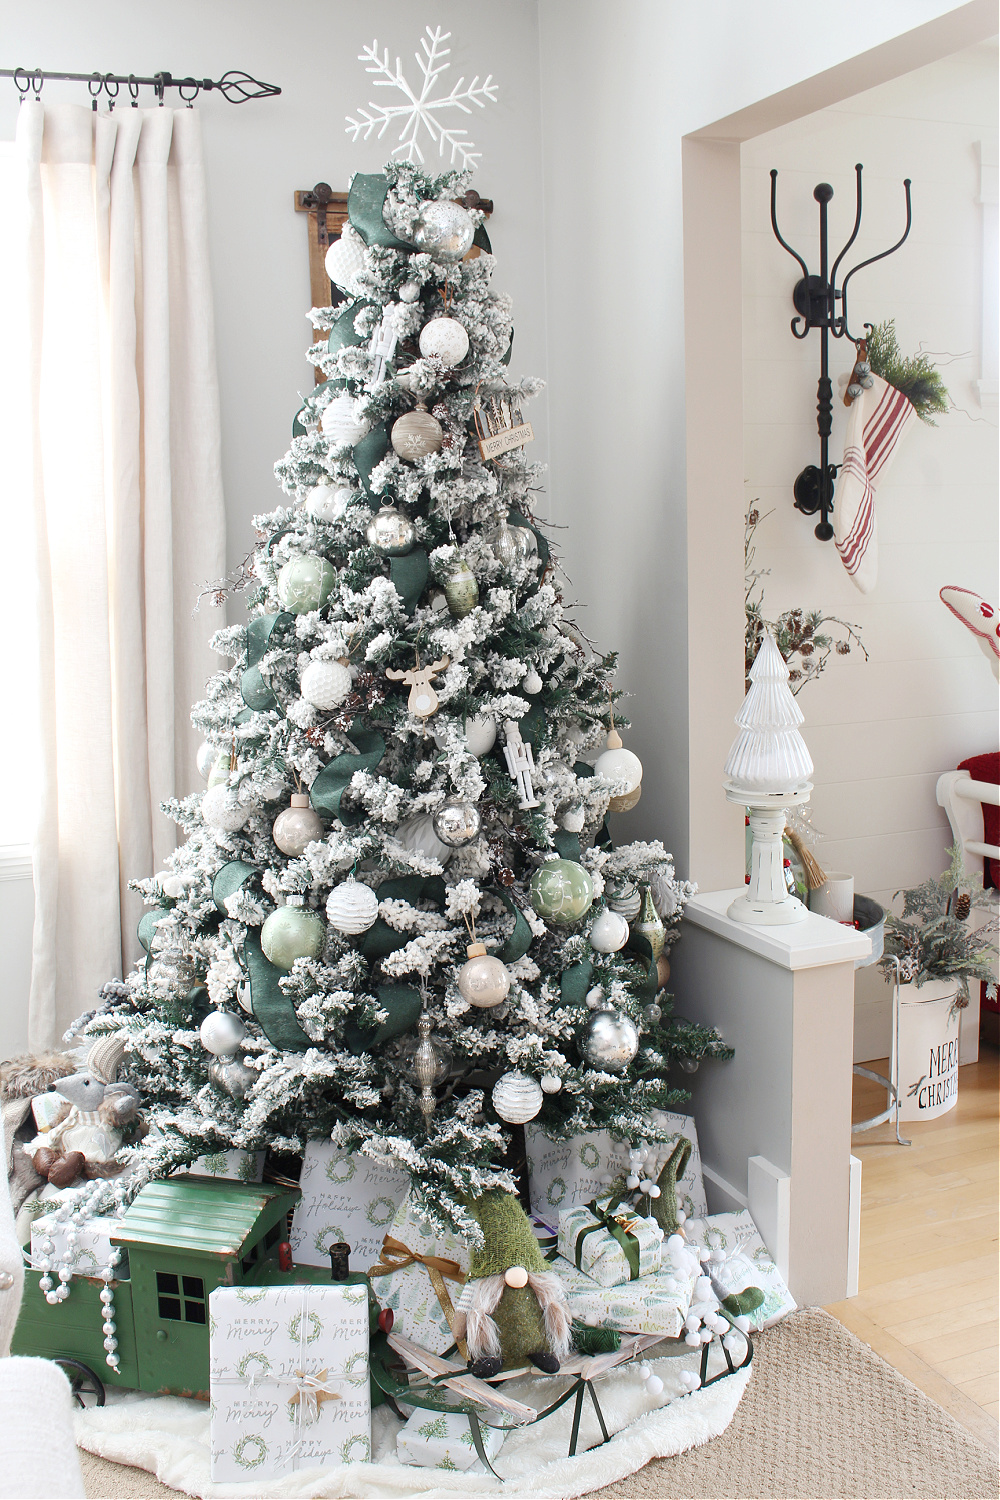 Flocked Christmas tree decorated with green, white, and metallics.